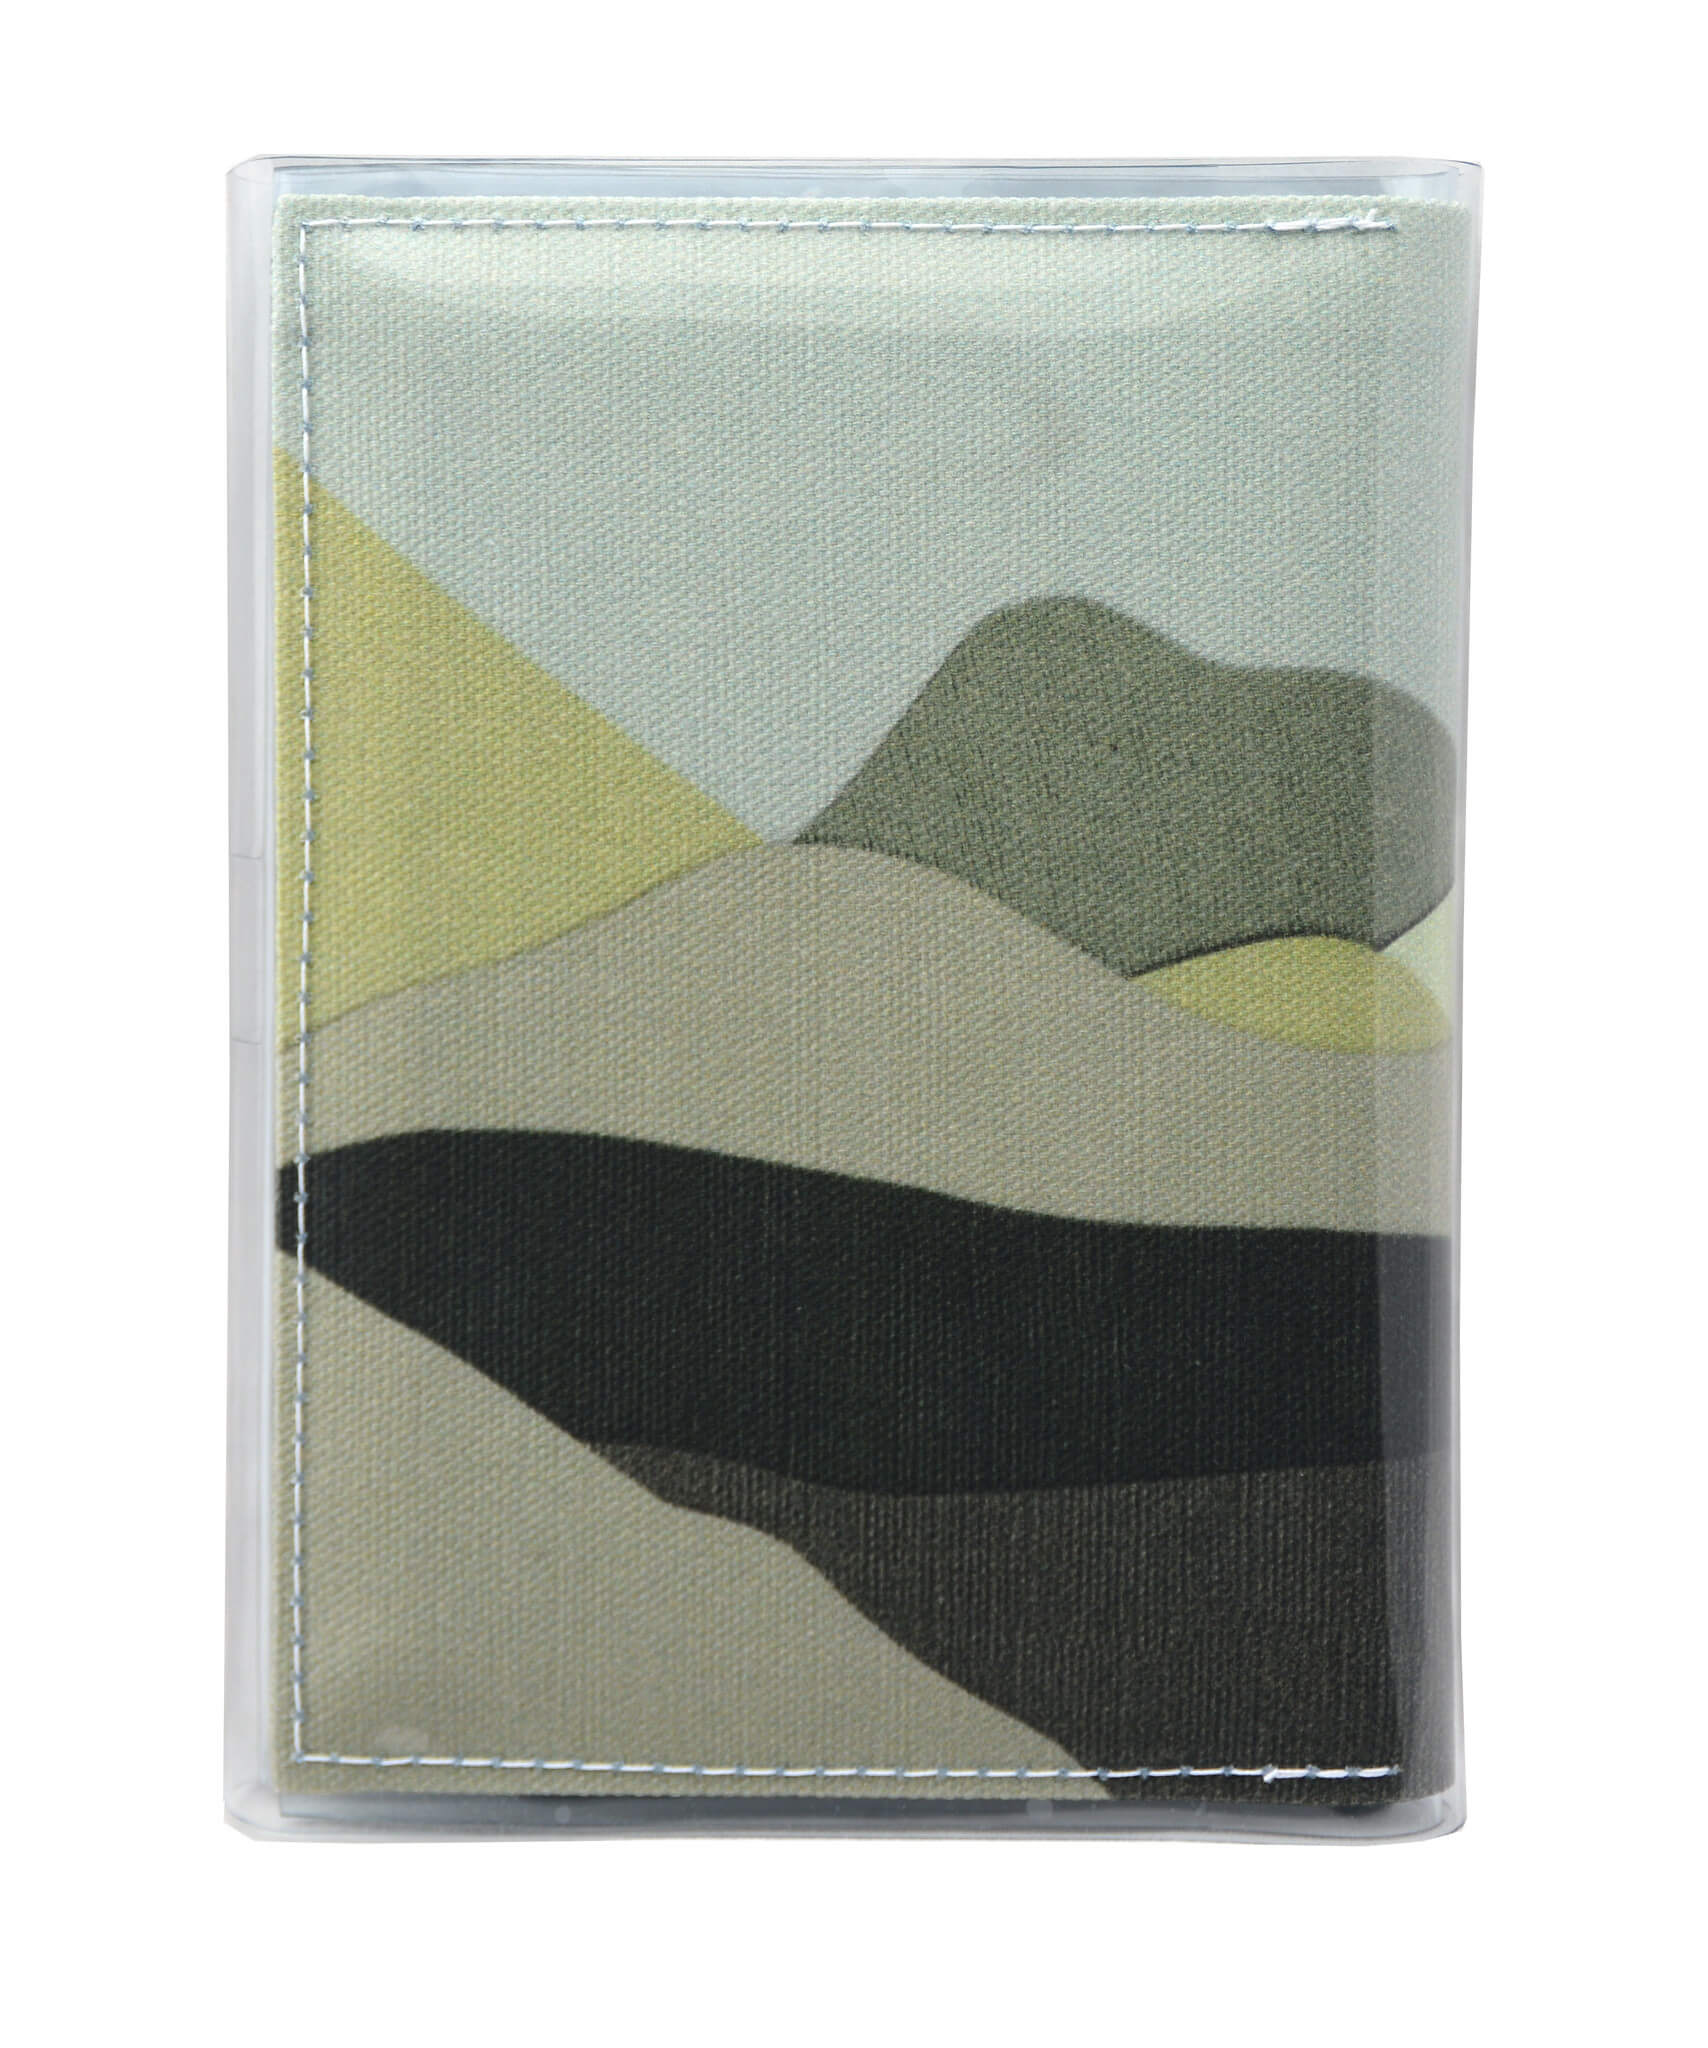 This is an image of the rear of a Kitty Came Home A6 journal in the 'Moonlight drive’ design by Satin and Tat. A landscape of green hued hills beneath a pale green sky.